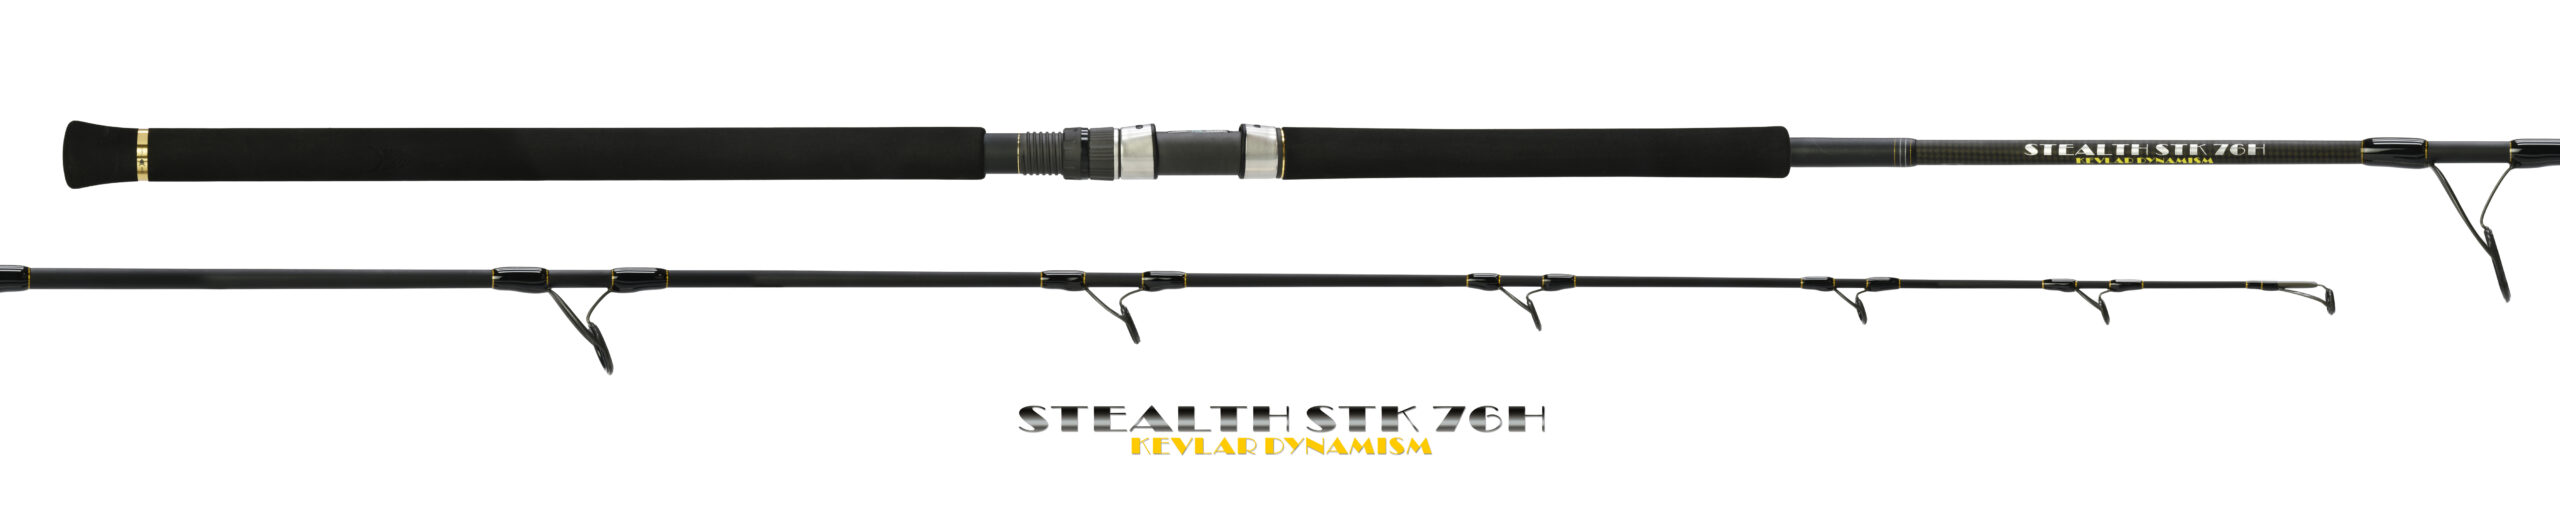 Canna Spinning Temple Reef Stealth STK 76H max 100 g